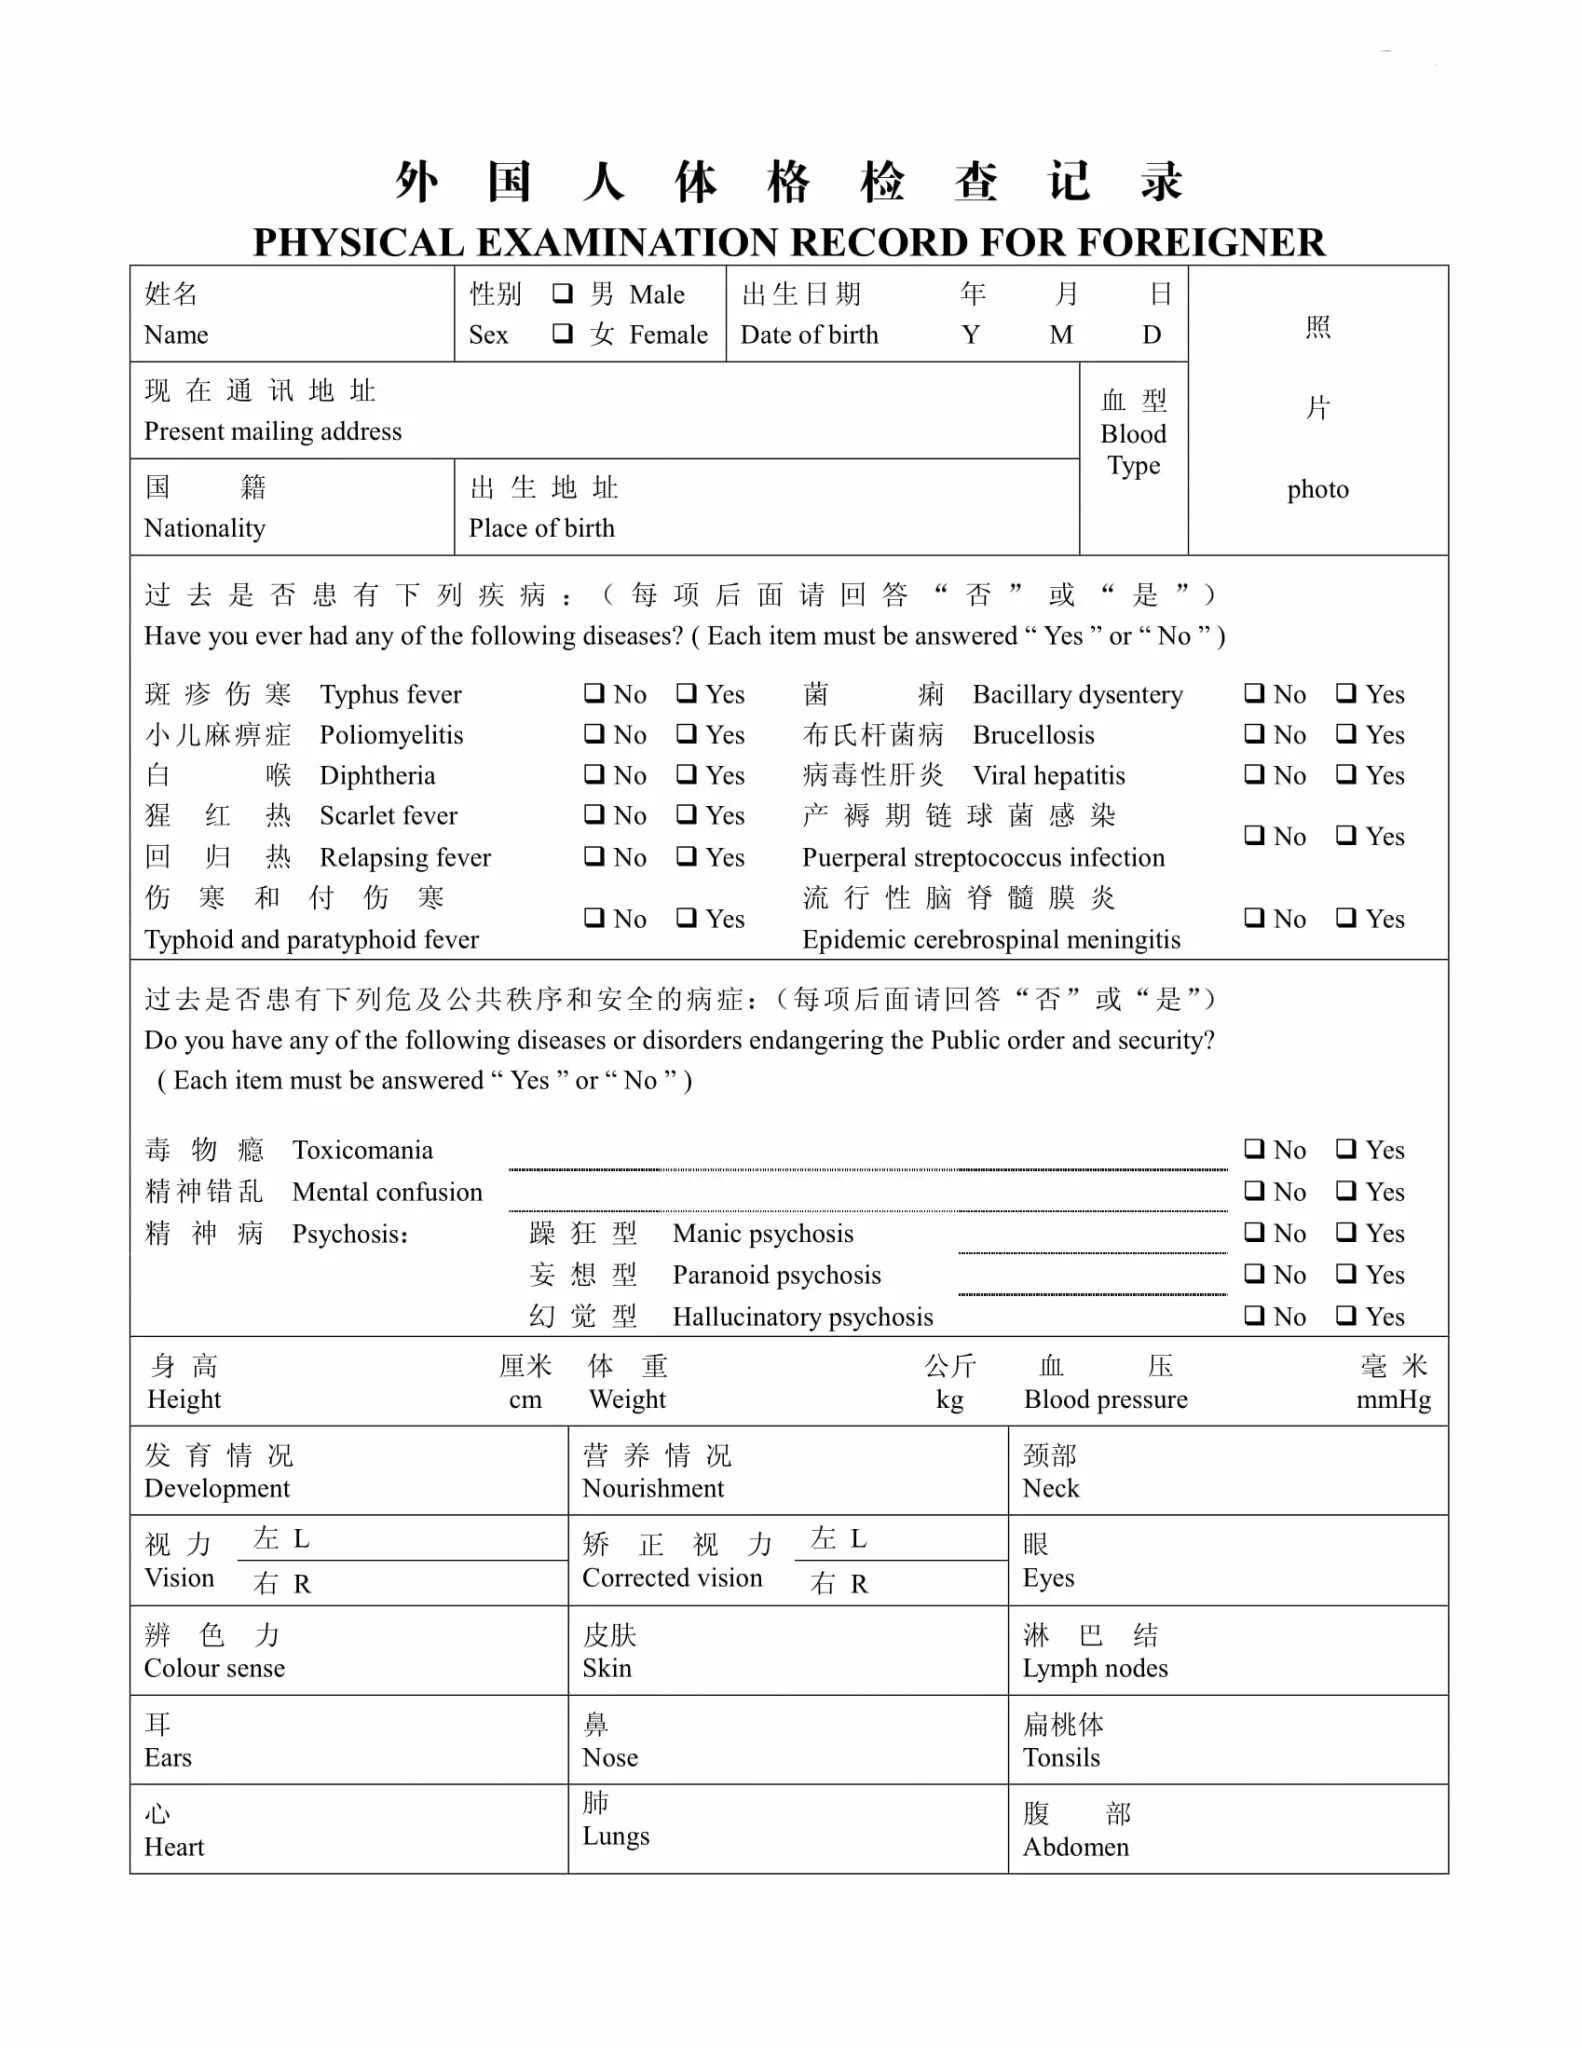 Physical form. Physical examination record for Foreigner. Physical examination record for Foreigner China. Foreigner physical examination form. Foreigner physical examination form China на русском.